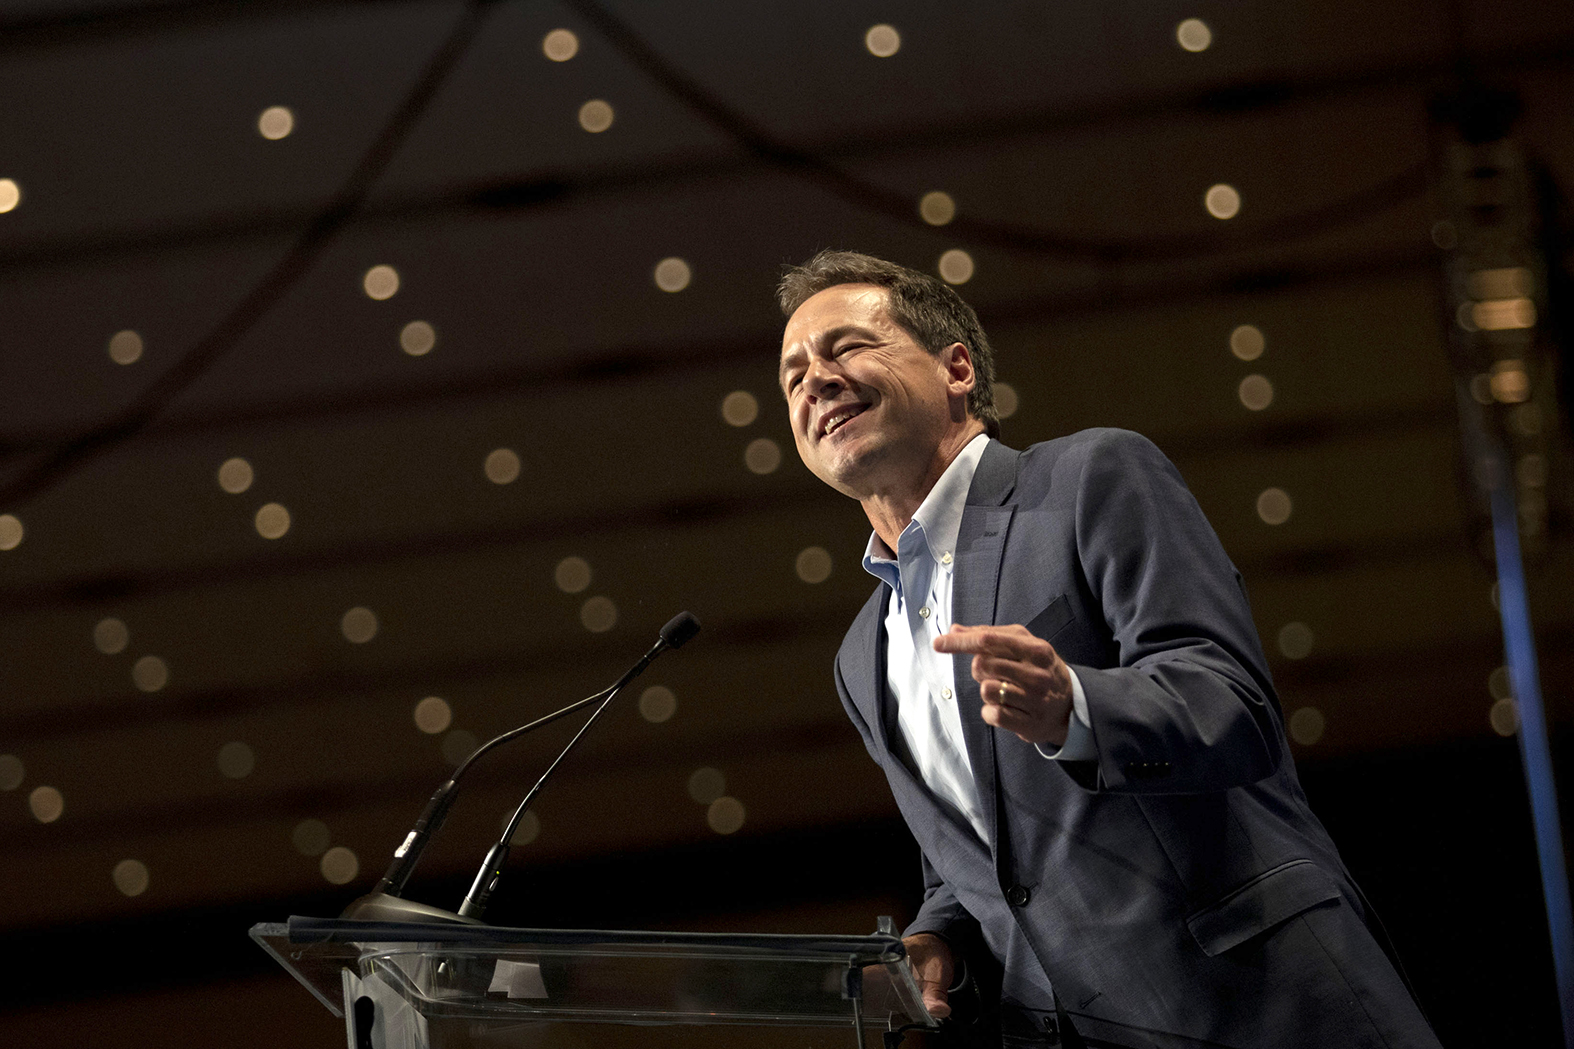 Governor Bullock at an Iowa Democratic Party Hall of Fame event in 2019.